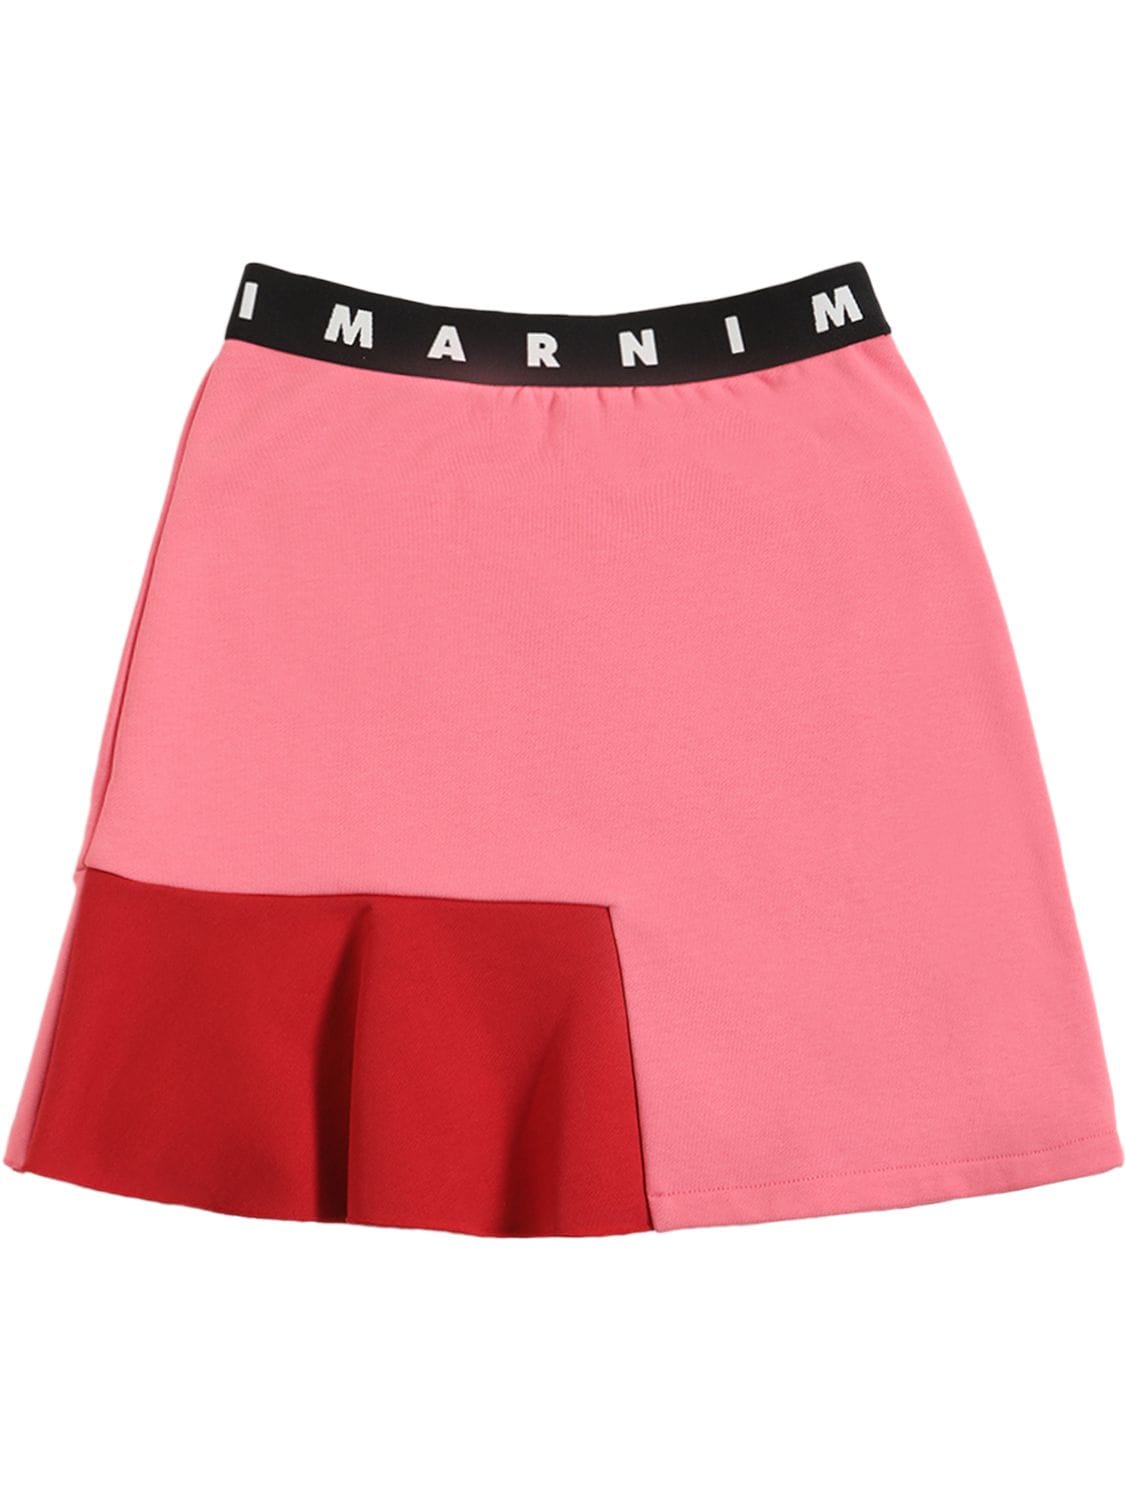 Image of Color Block Cotton Skirt W/logo Tape